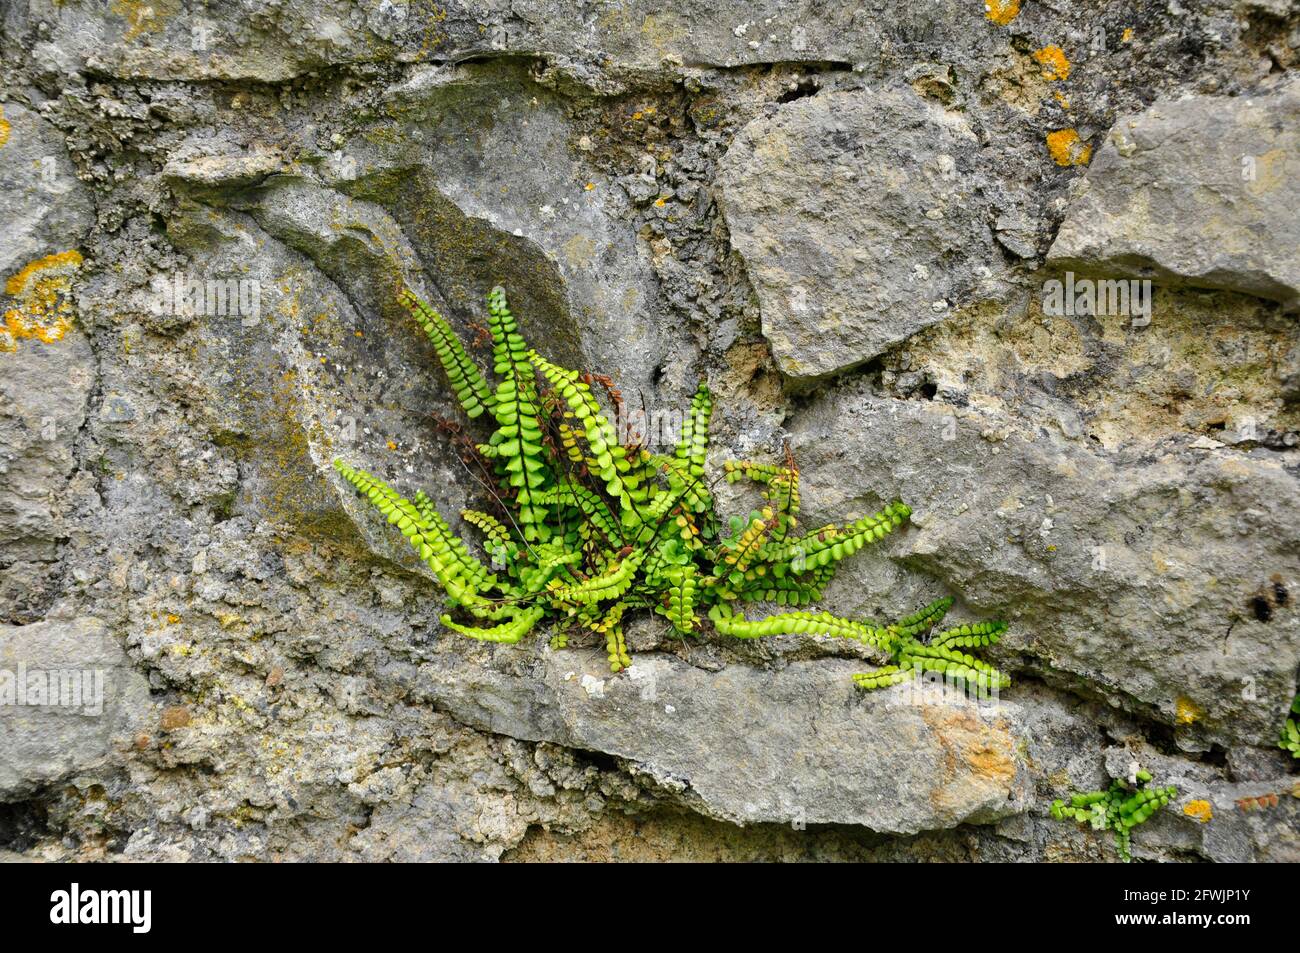 Maidenhair Spleenwort' Asplenium trichomanes' plant growing in mortar of a stone wall at Carew Castle in Pembrokeshire, South Wales. Stock Photo